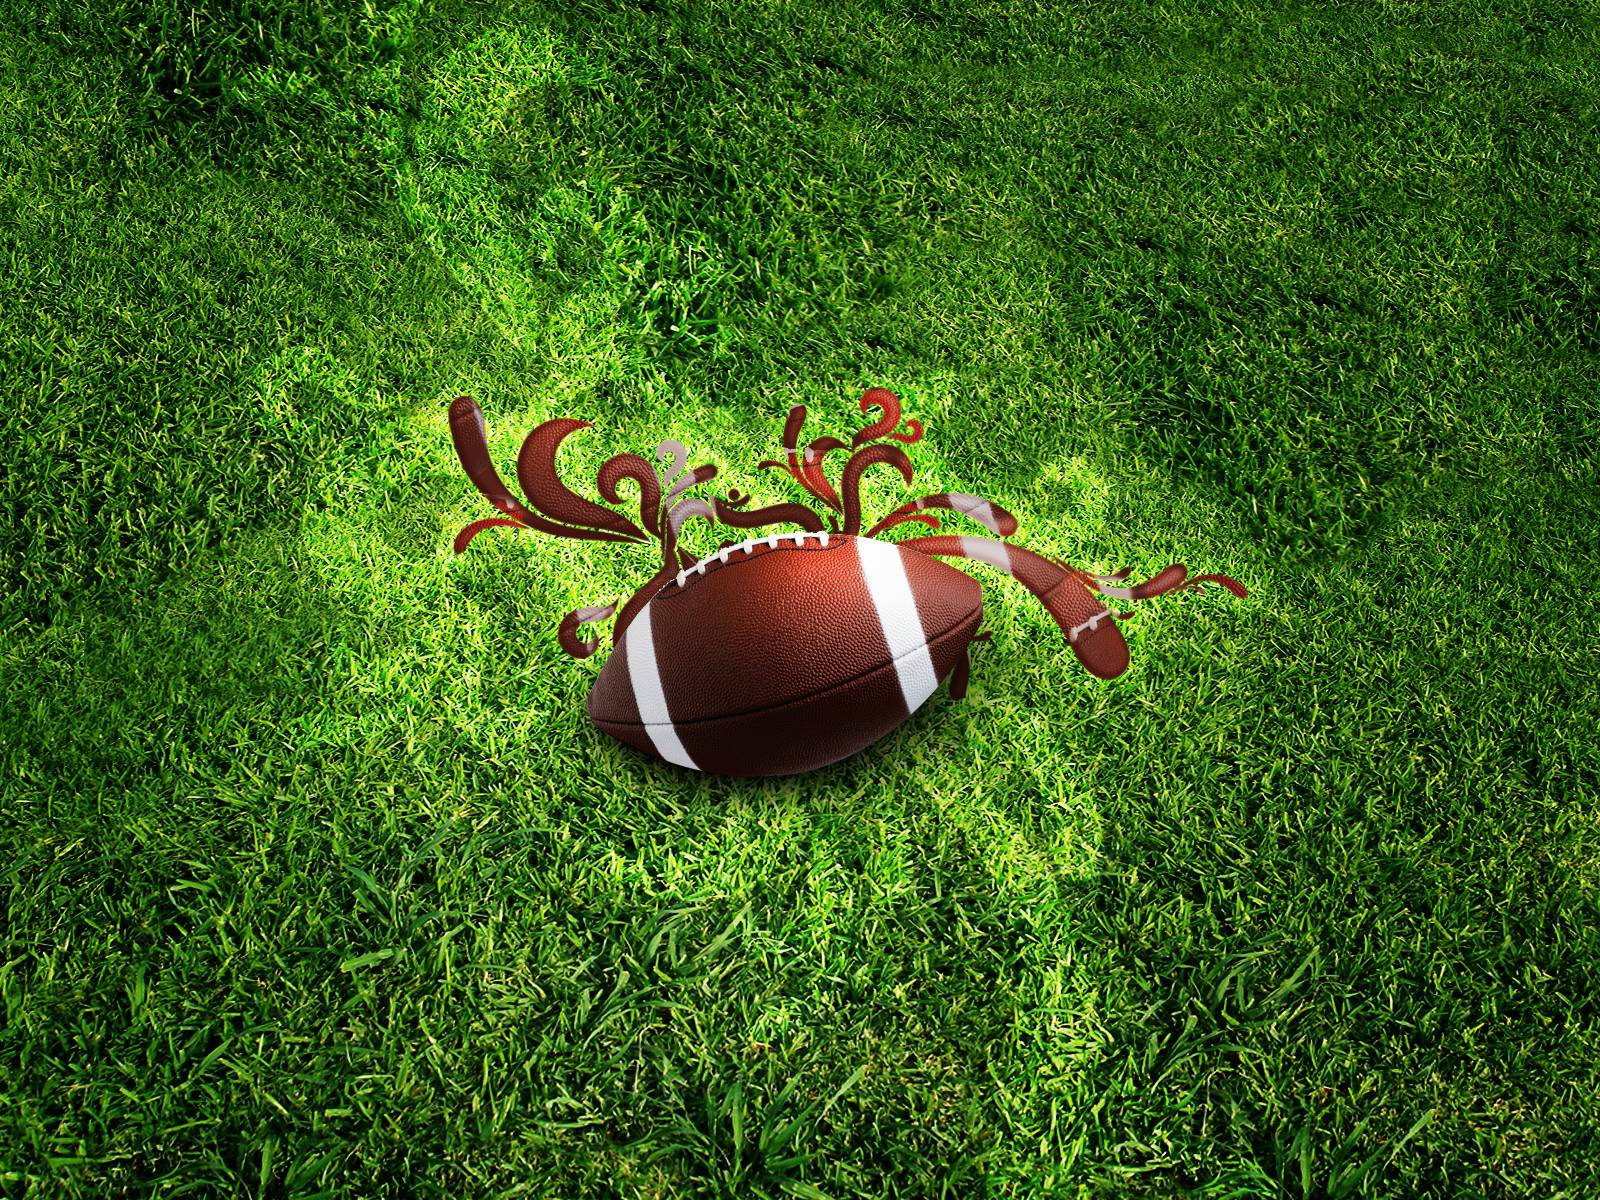 Cool Football Crab Design On Grass Background